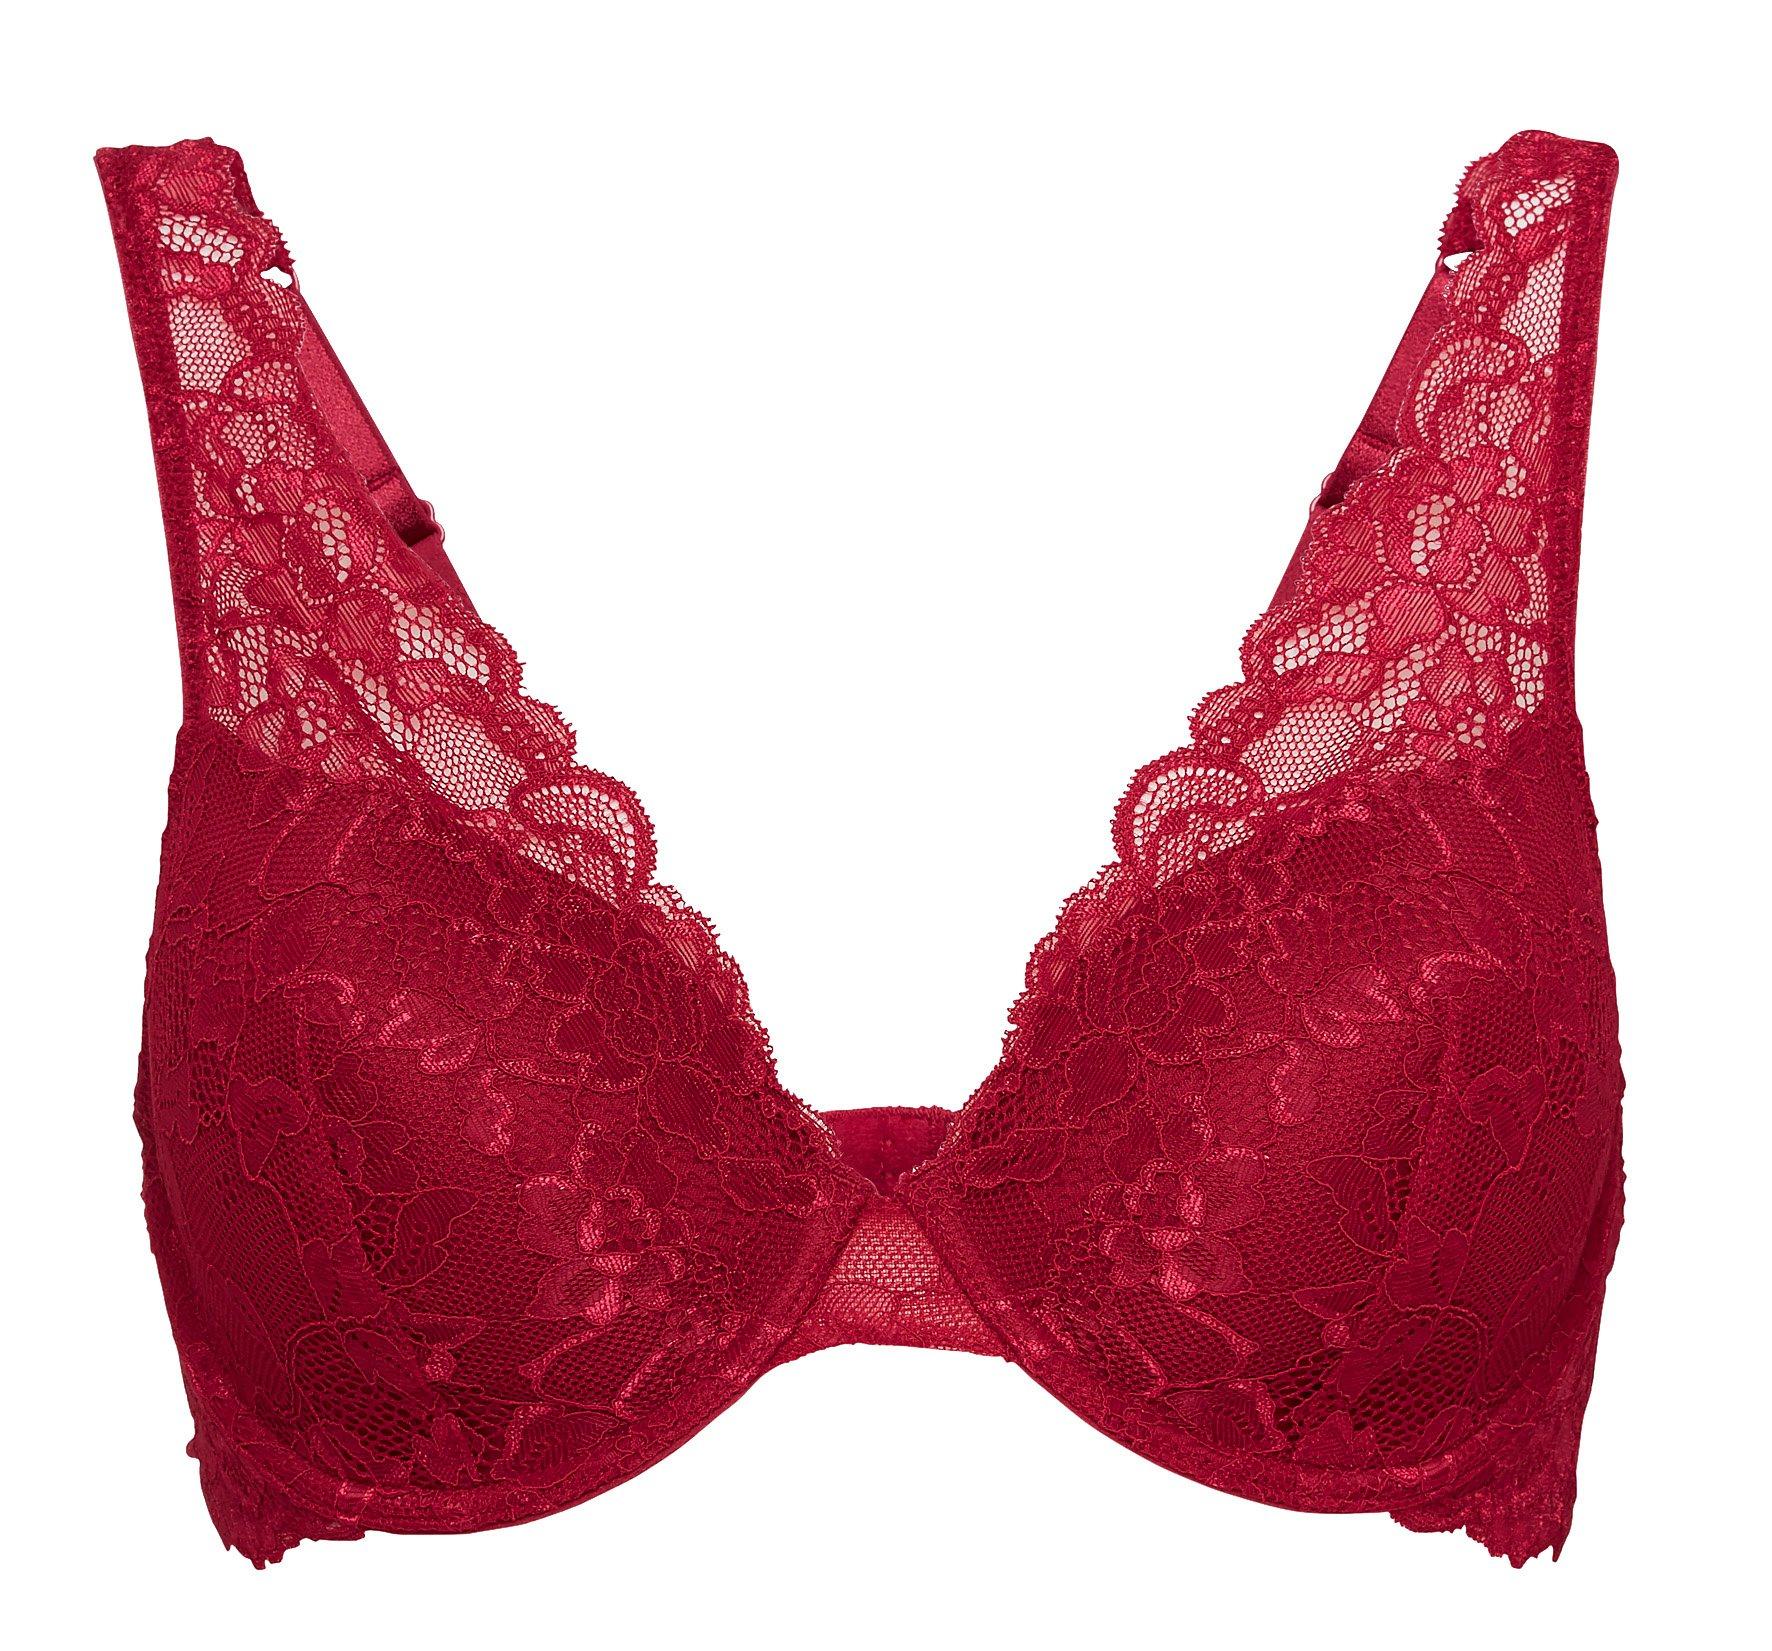 Sheer Bra Red - Amour